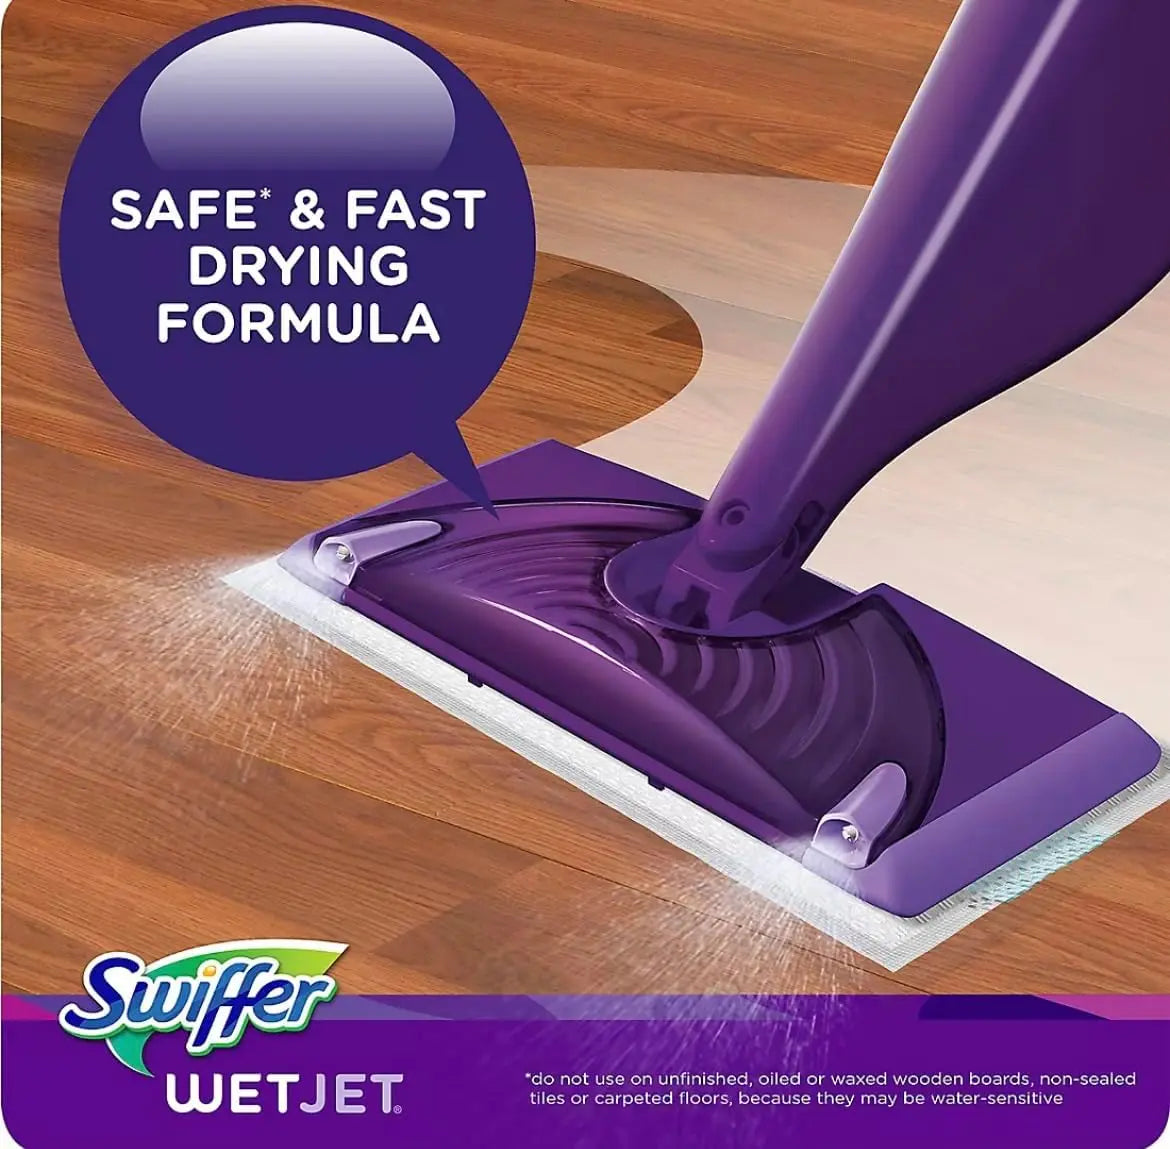 Swiffer WETJET Multi-Purpose Floor Cleaner Solution With Febreze Refill, Lavendar Vanilla And Comfort Scent, 42.2 Ounce (Pack of 3) Swiffer